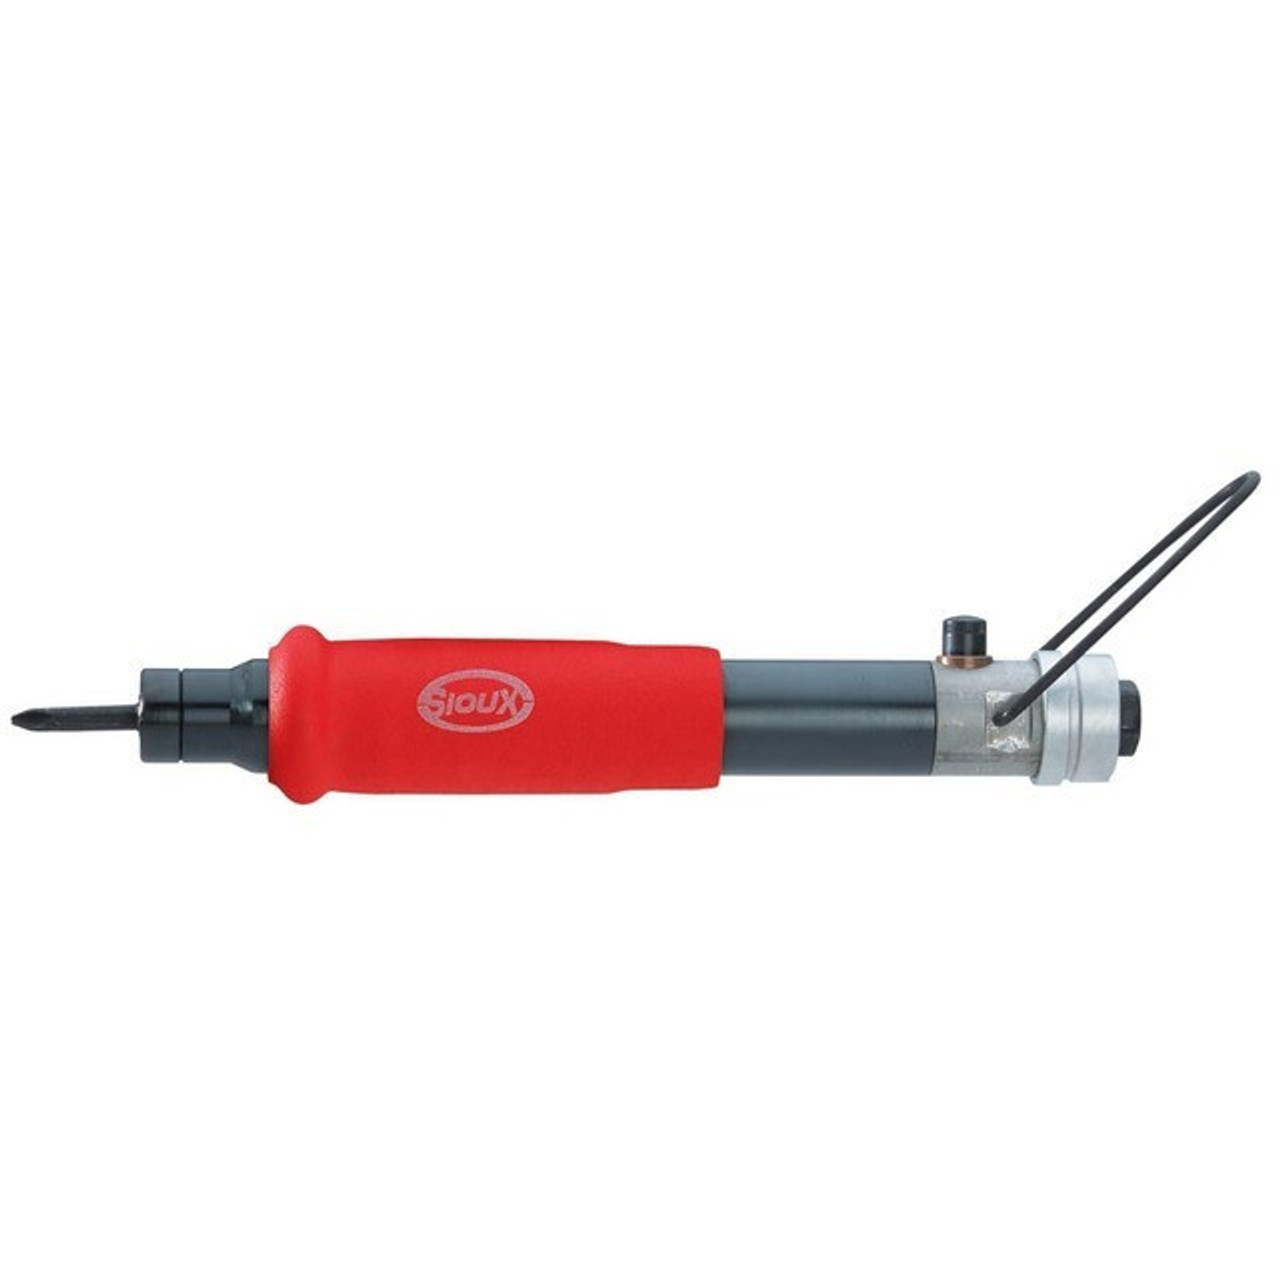 Sioux Tools 1ST2308Q Inline Torque Control Screwdriver or 1/4 Quick Change or 1500 RPM or 5-25 in-lb Max Torque